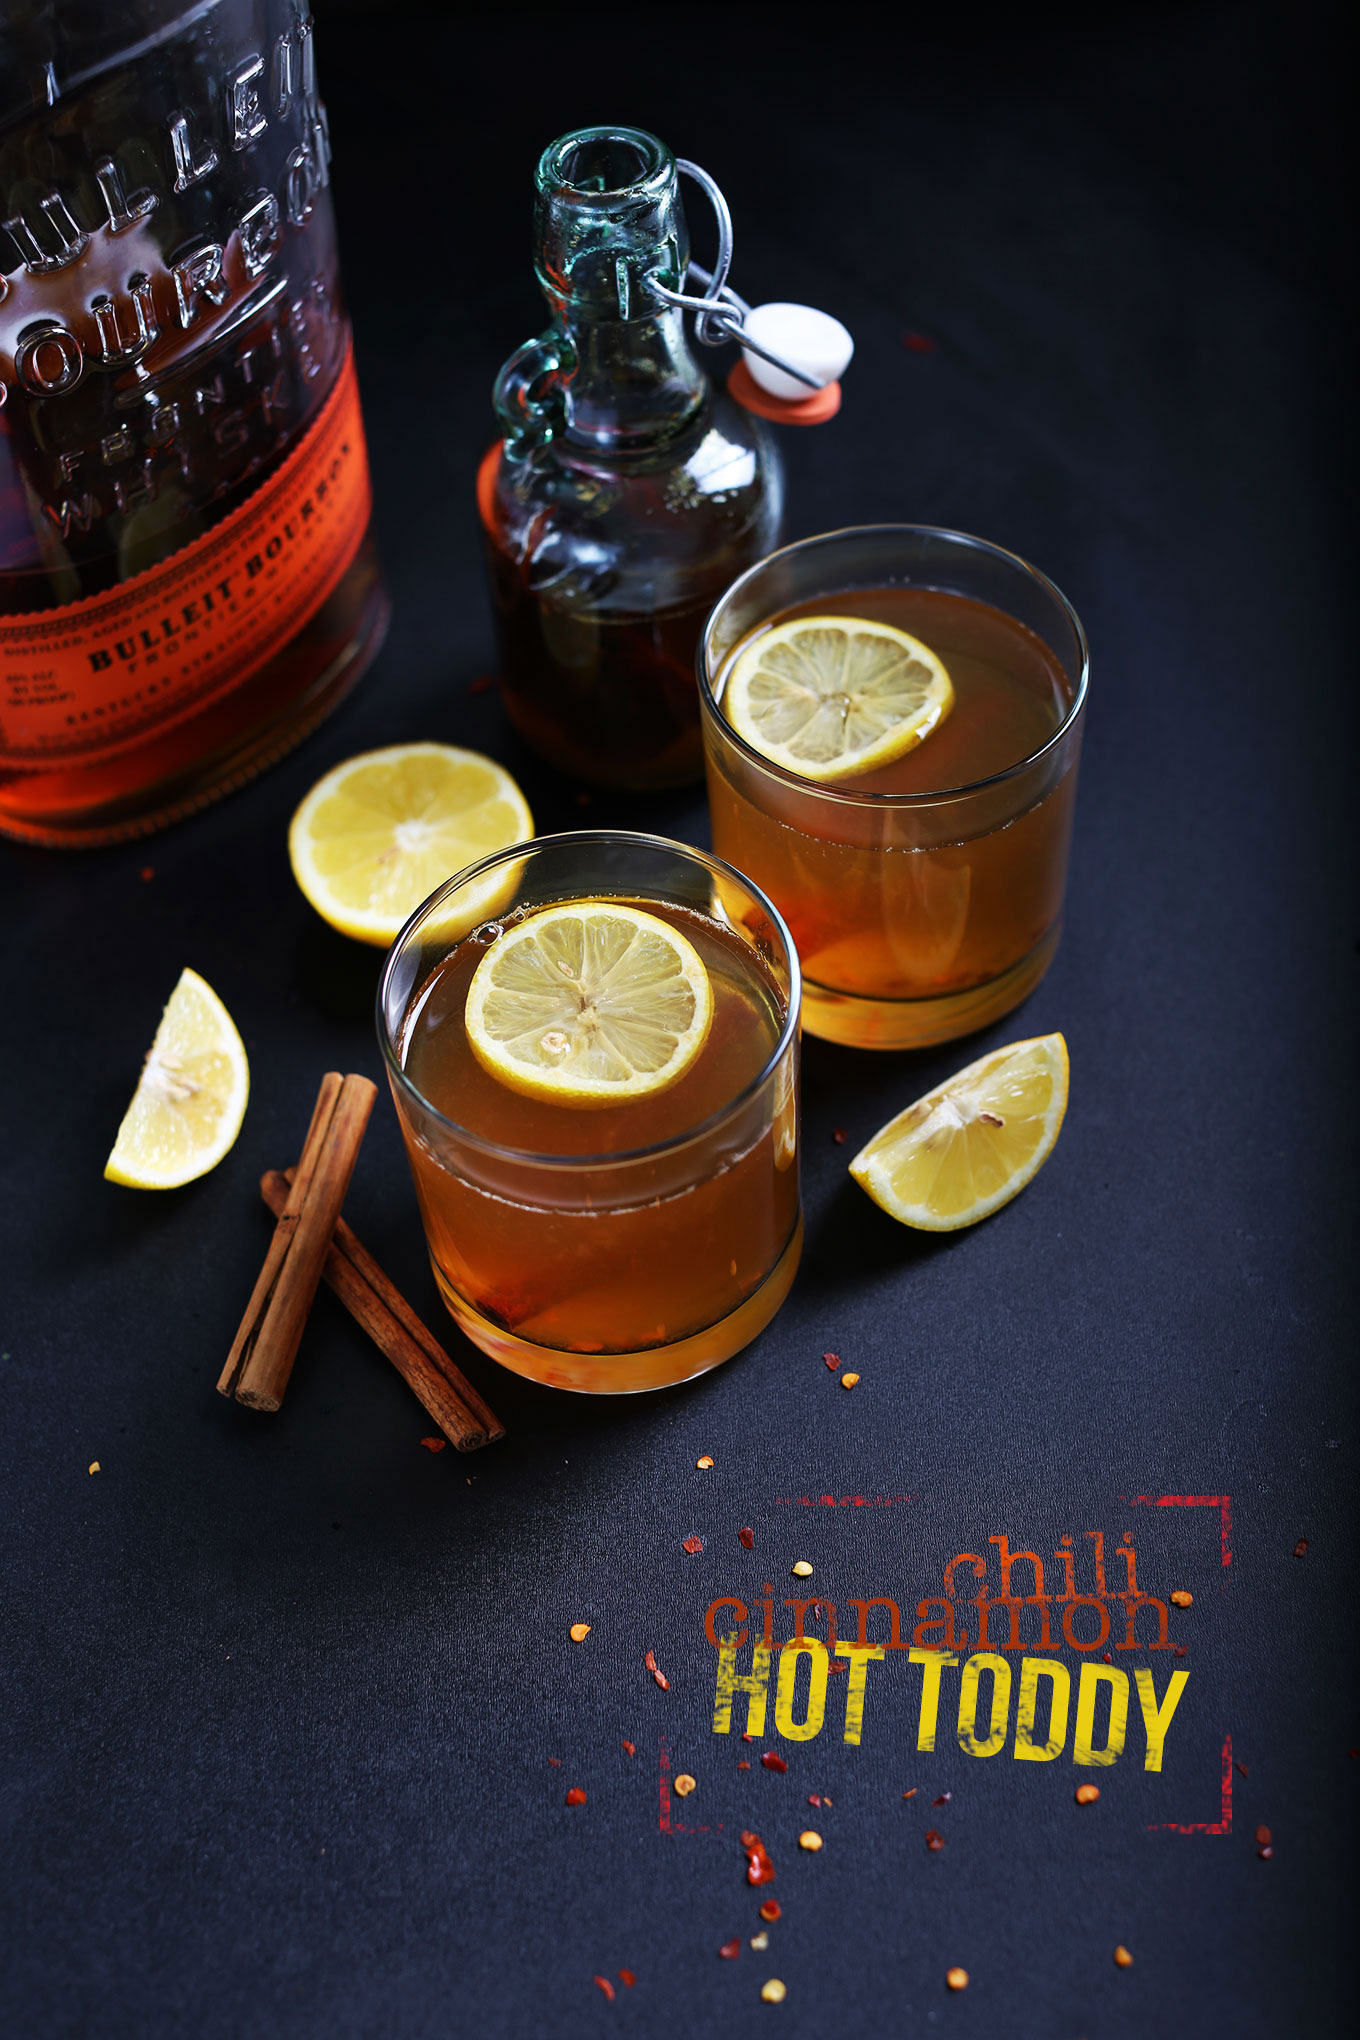 Glasses filled with our Chili Cinnamon Hot Toddy recipe